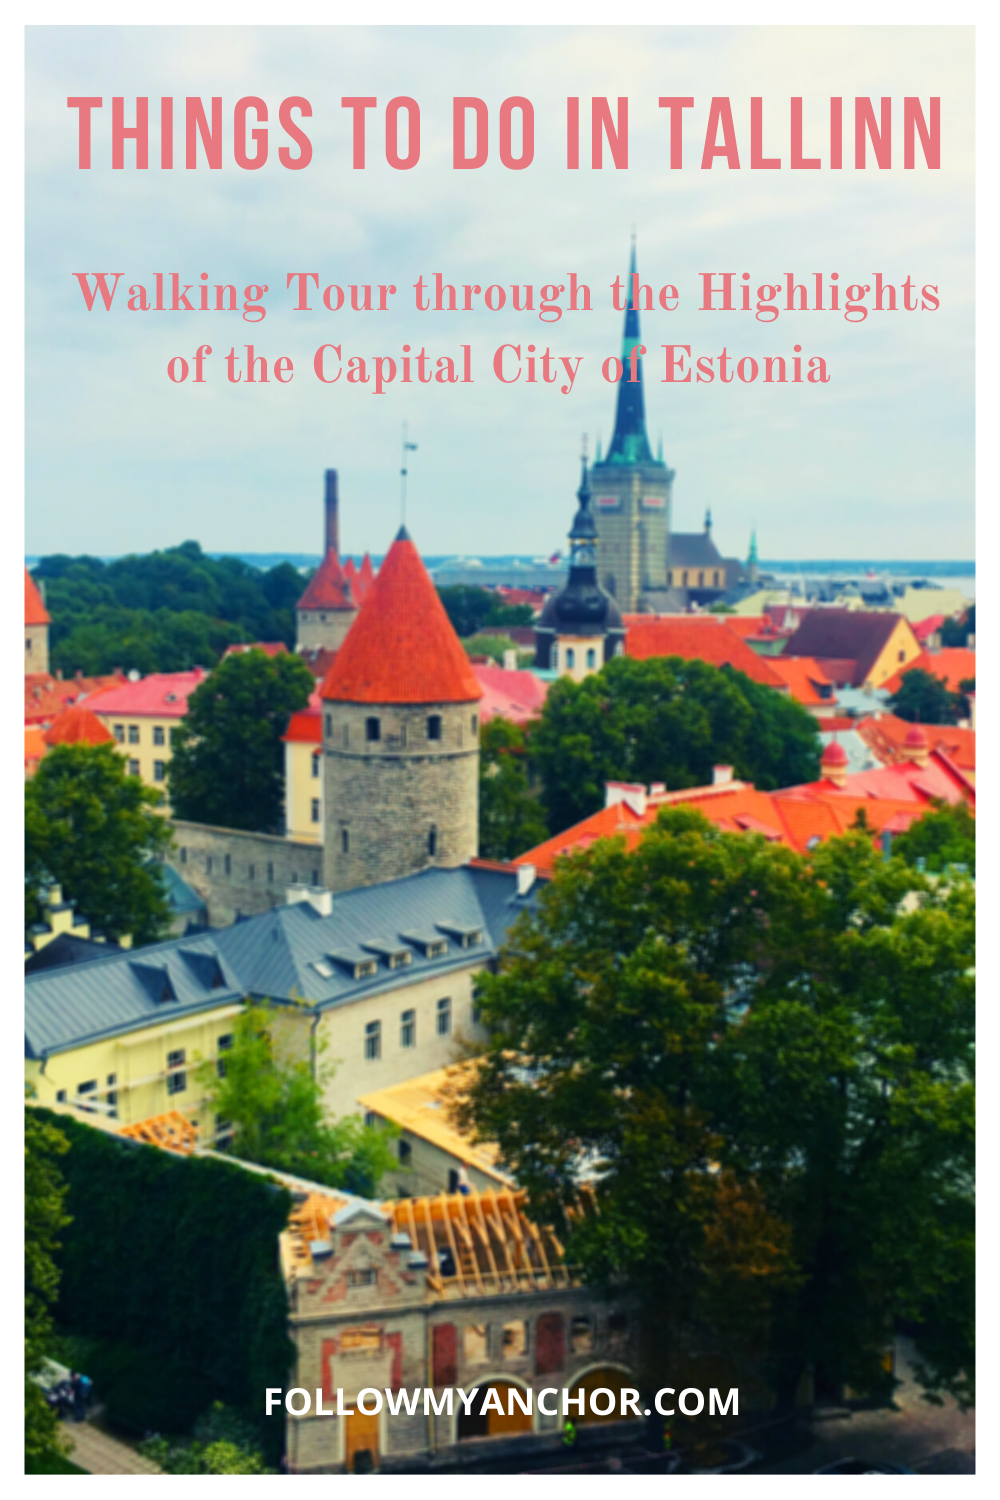 THINGS TO DO IN TALLINN: WALKING TOUR FOR CRUISE GUESTS